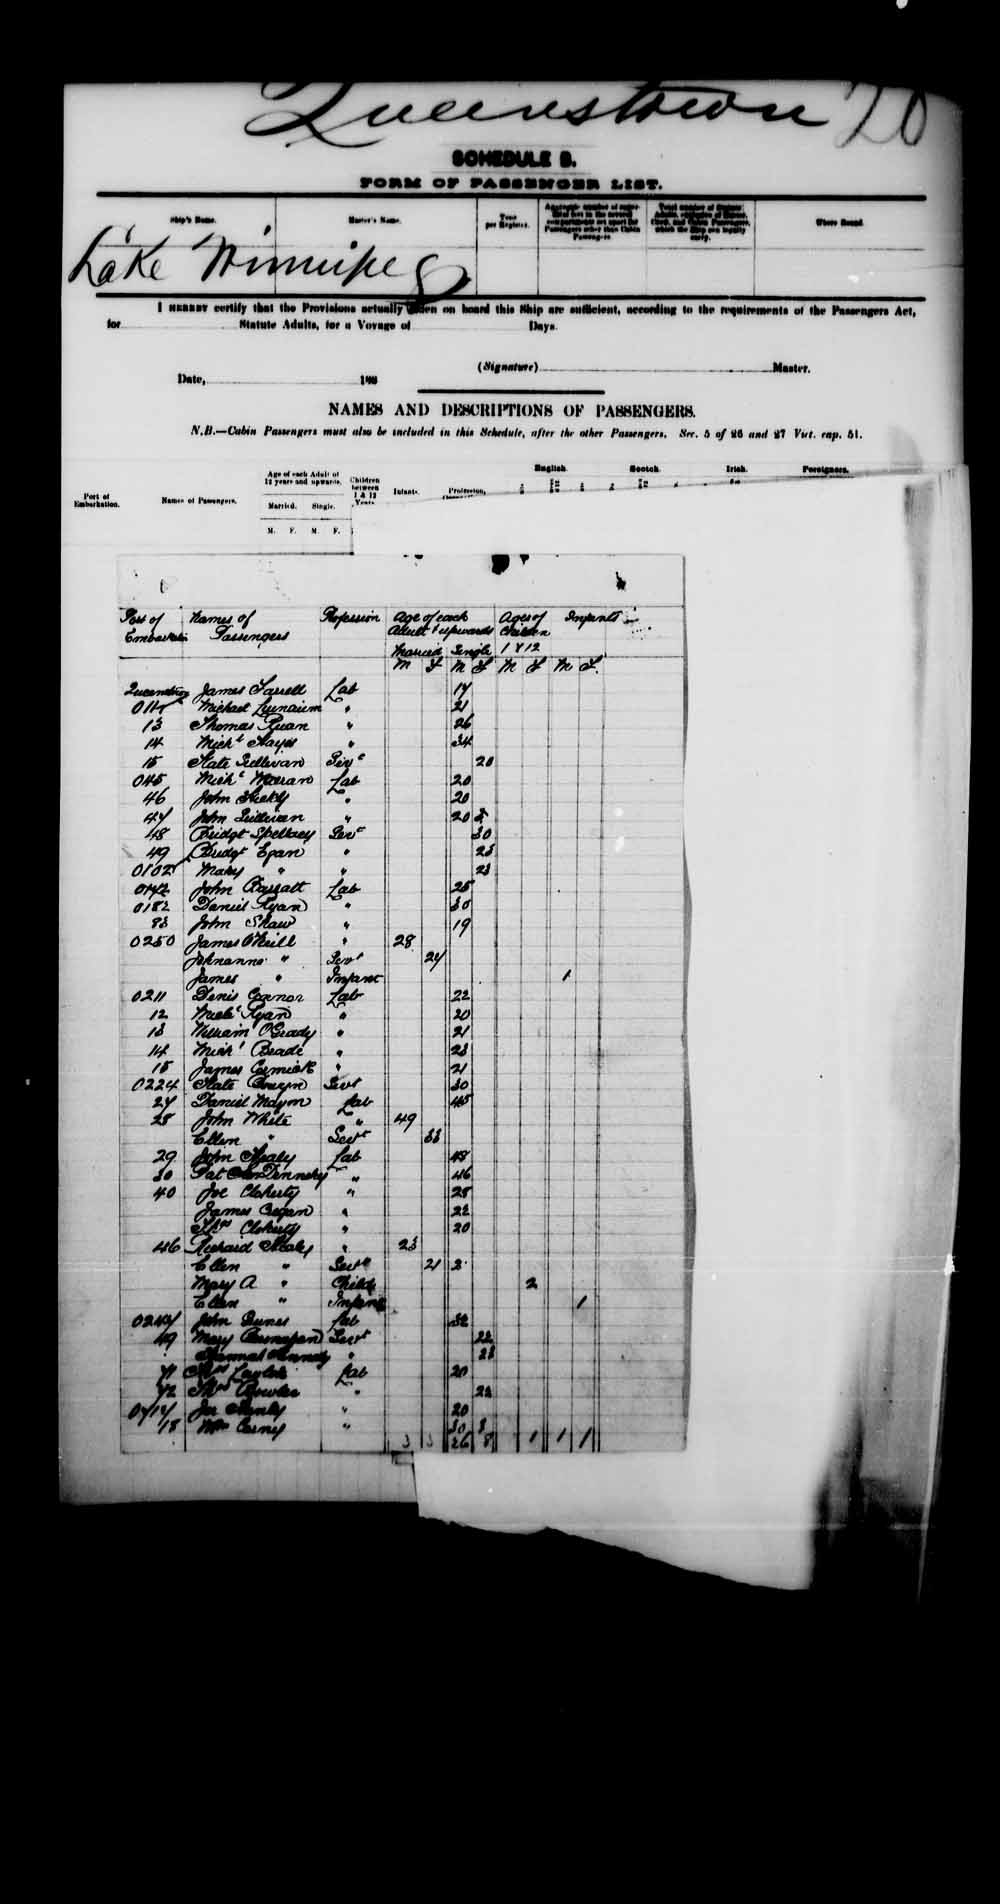 Digitized page of Passenger Lists for Image No.: e003541627